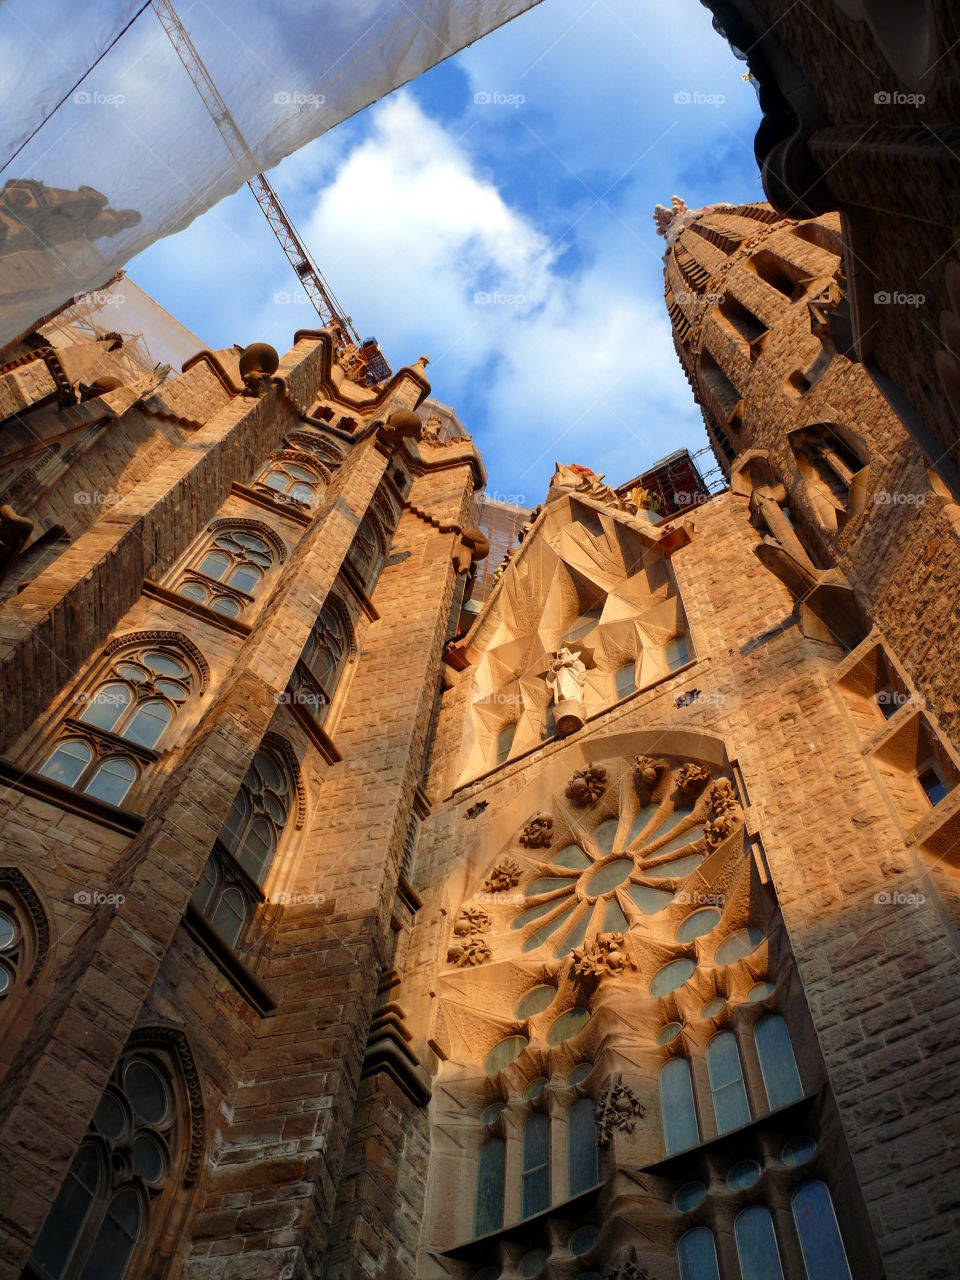 La Sagrada Familia | Basilica | Barcelona, Spannung

Antoni Gaudi's renowned unfinished church, started in the 1880s, with museum and city views.